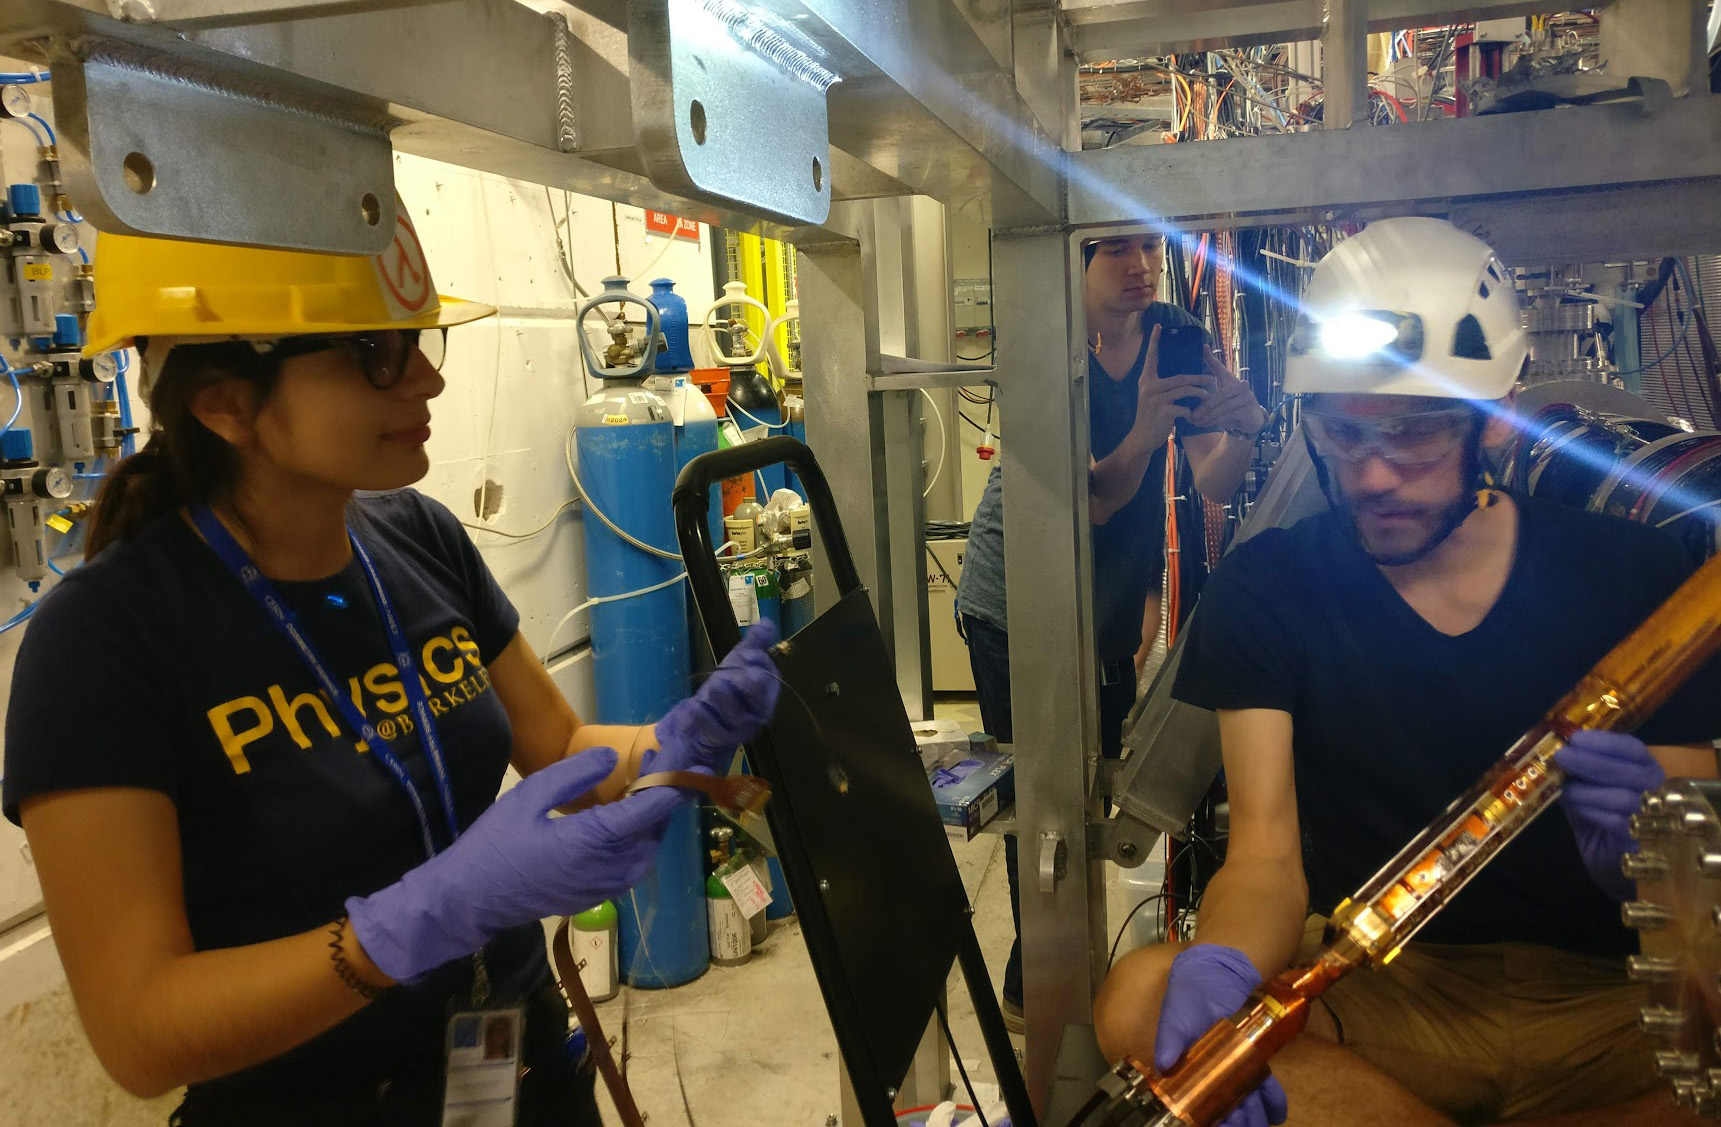 Young woman in yellow hardhat and blue T-shirt with Physics@Berkeley written on it, working beside a bearded man holding a copper-plated tube